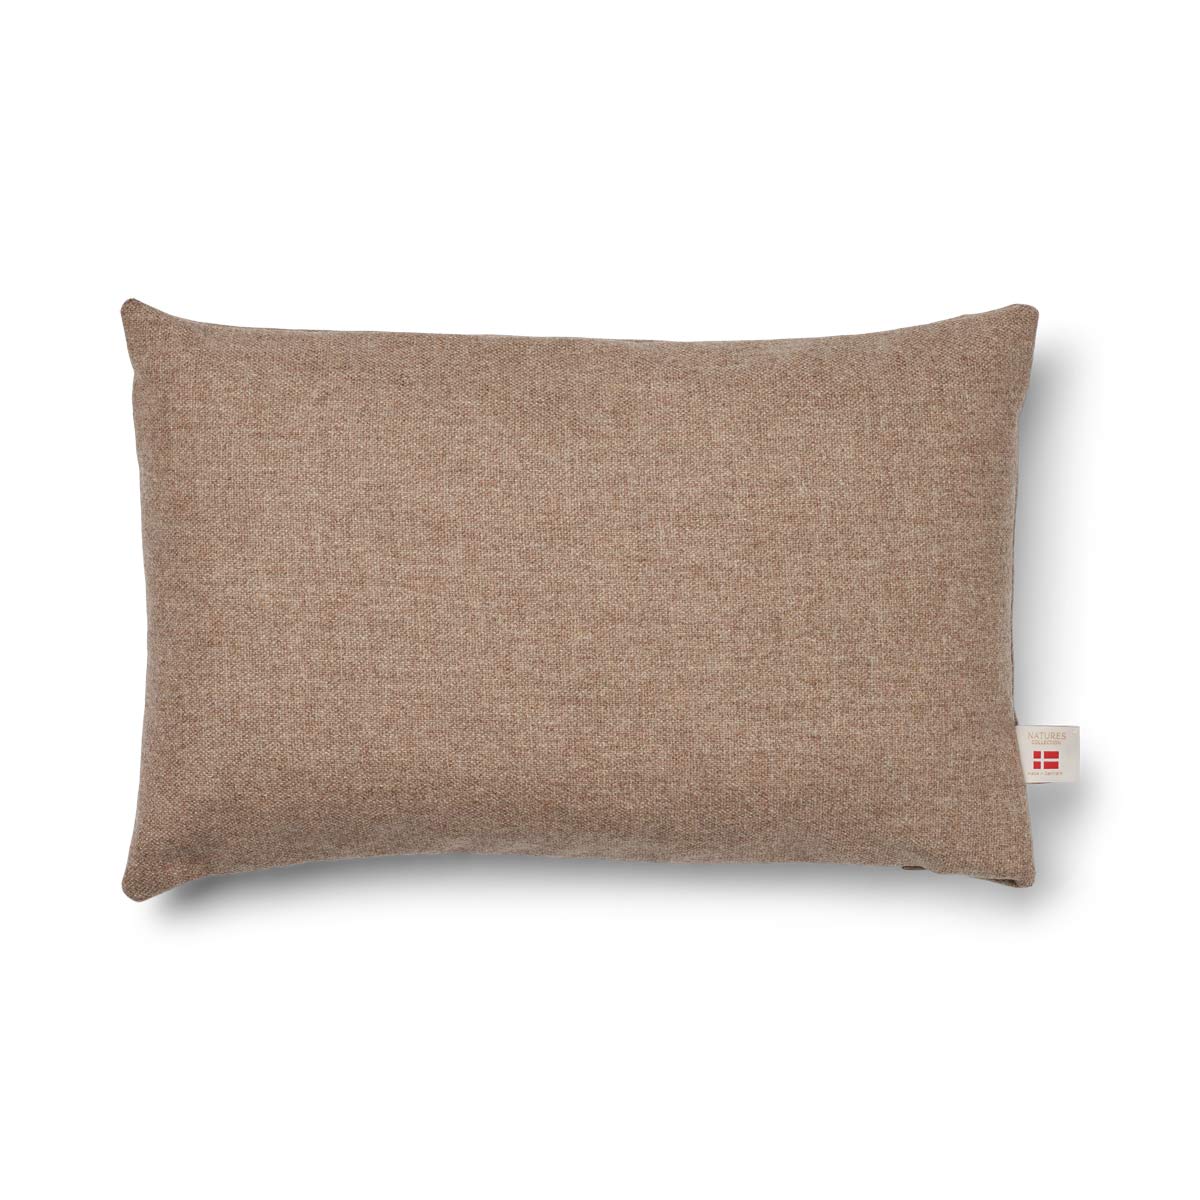 Classic Collection, Doublesided Cushion 100 % wool. Size: 34x52 cm.